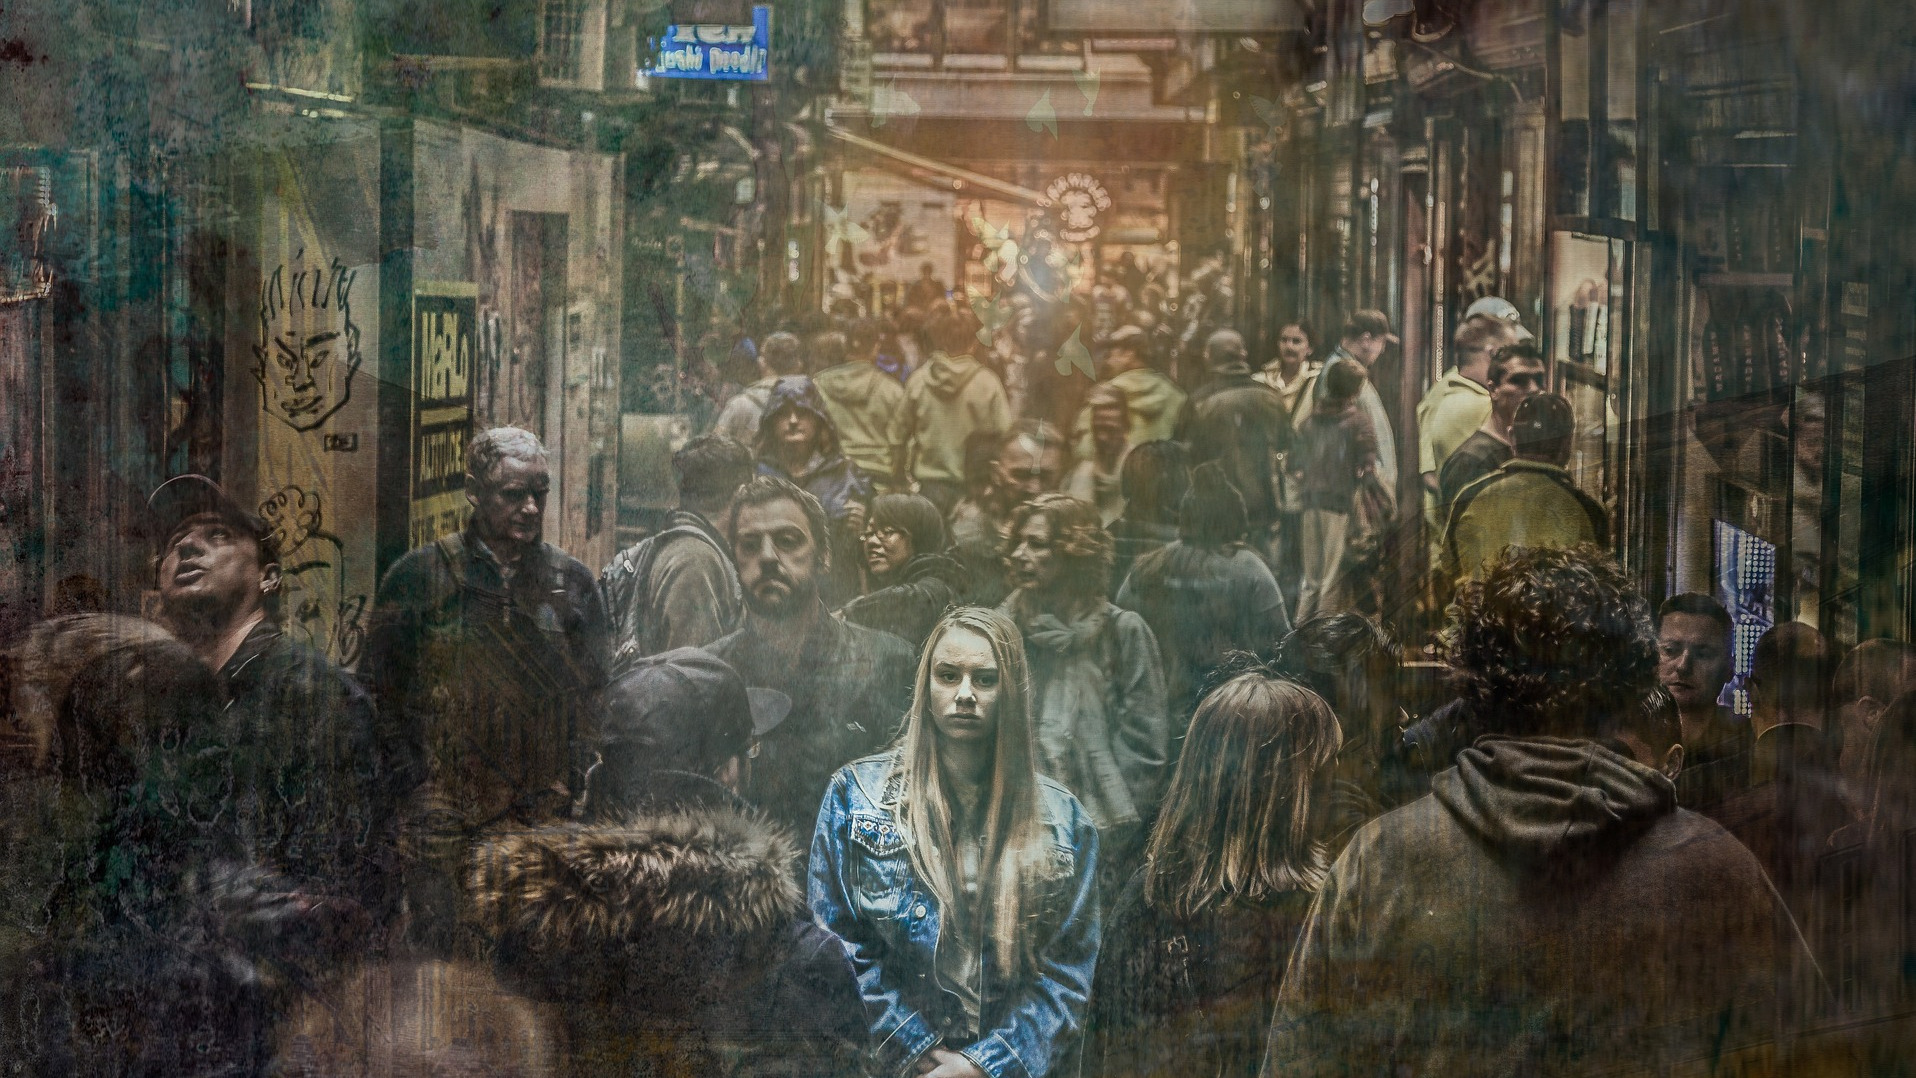 Depressed woman in the center of a crowd but alone